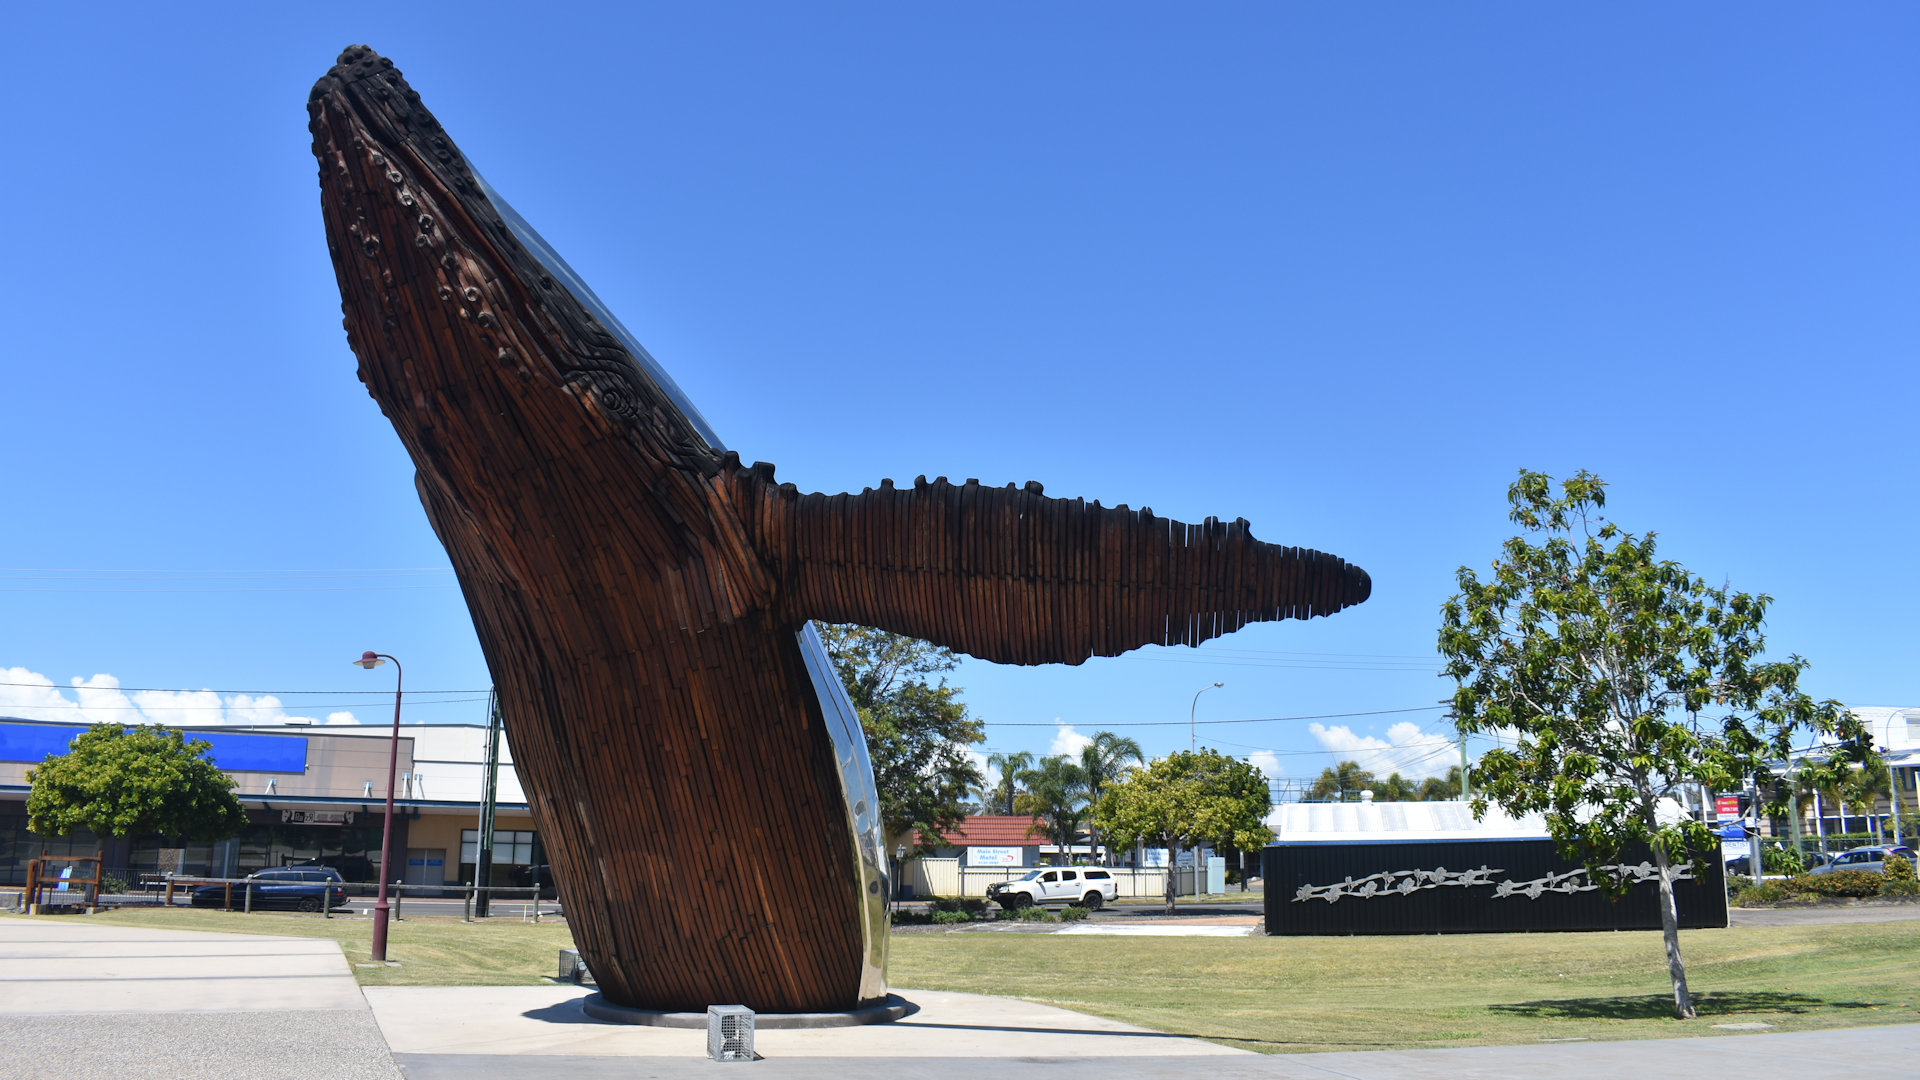 The Big Whale breaching, made of red ironbark timber and stainless steel